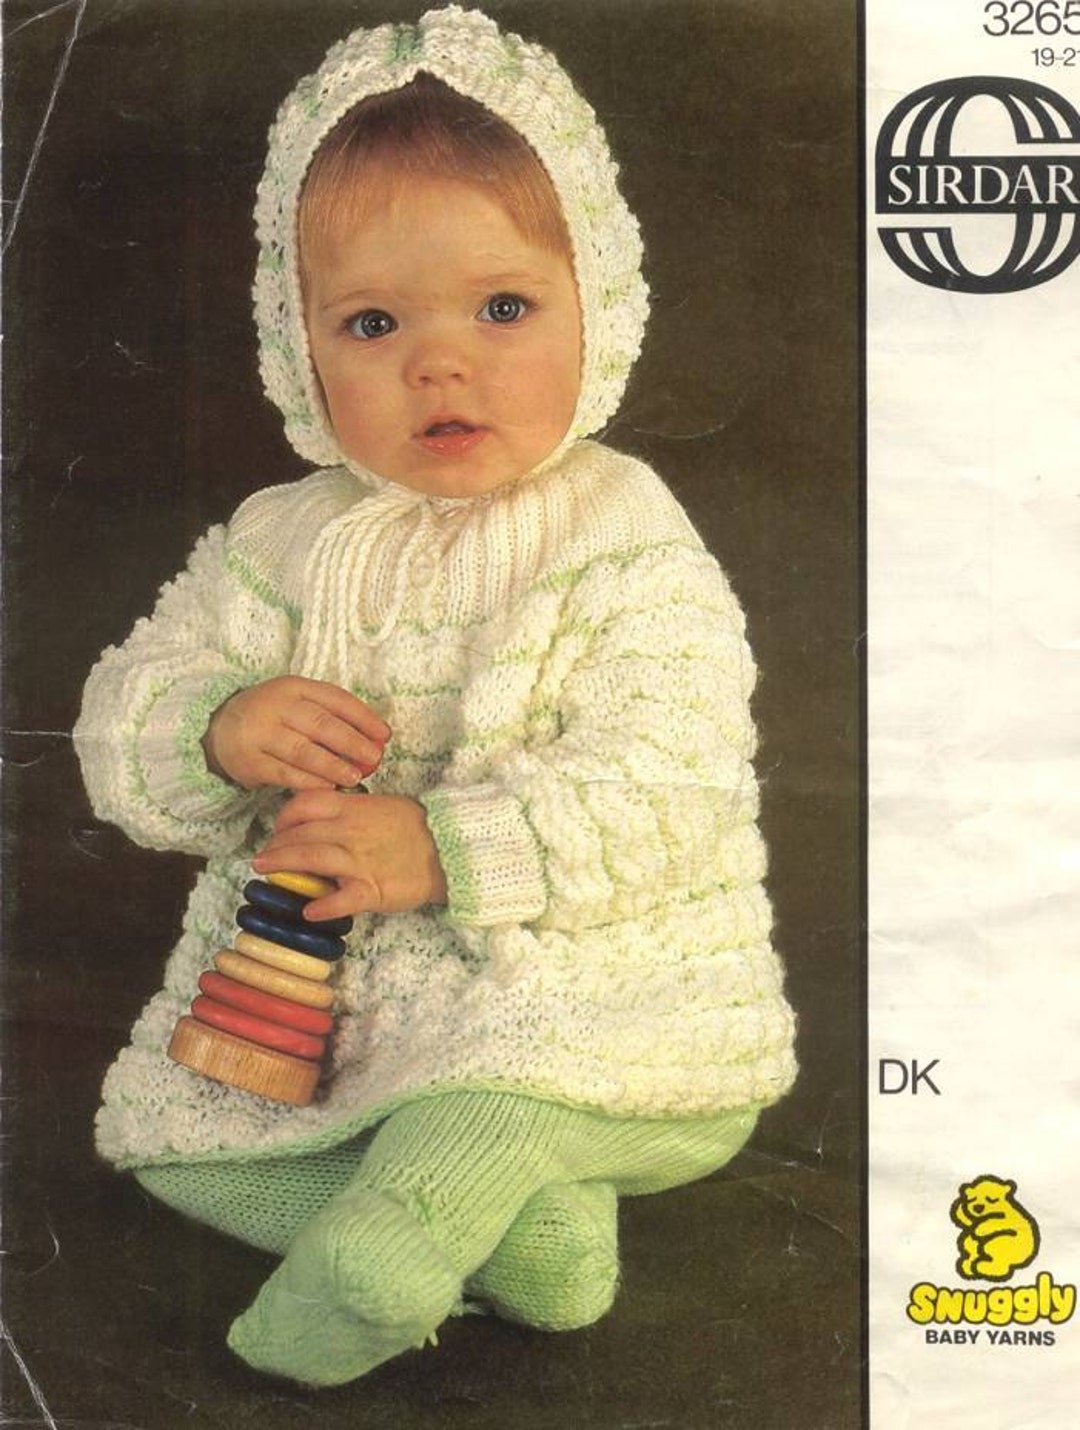 Sirdar 3265 Vintage Knit Pattern for Baby Angel Hooded Coat With ...